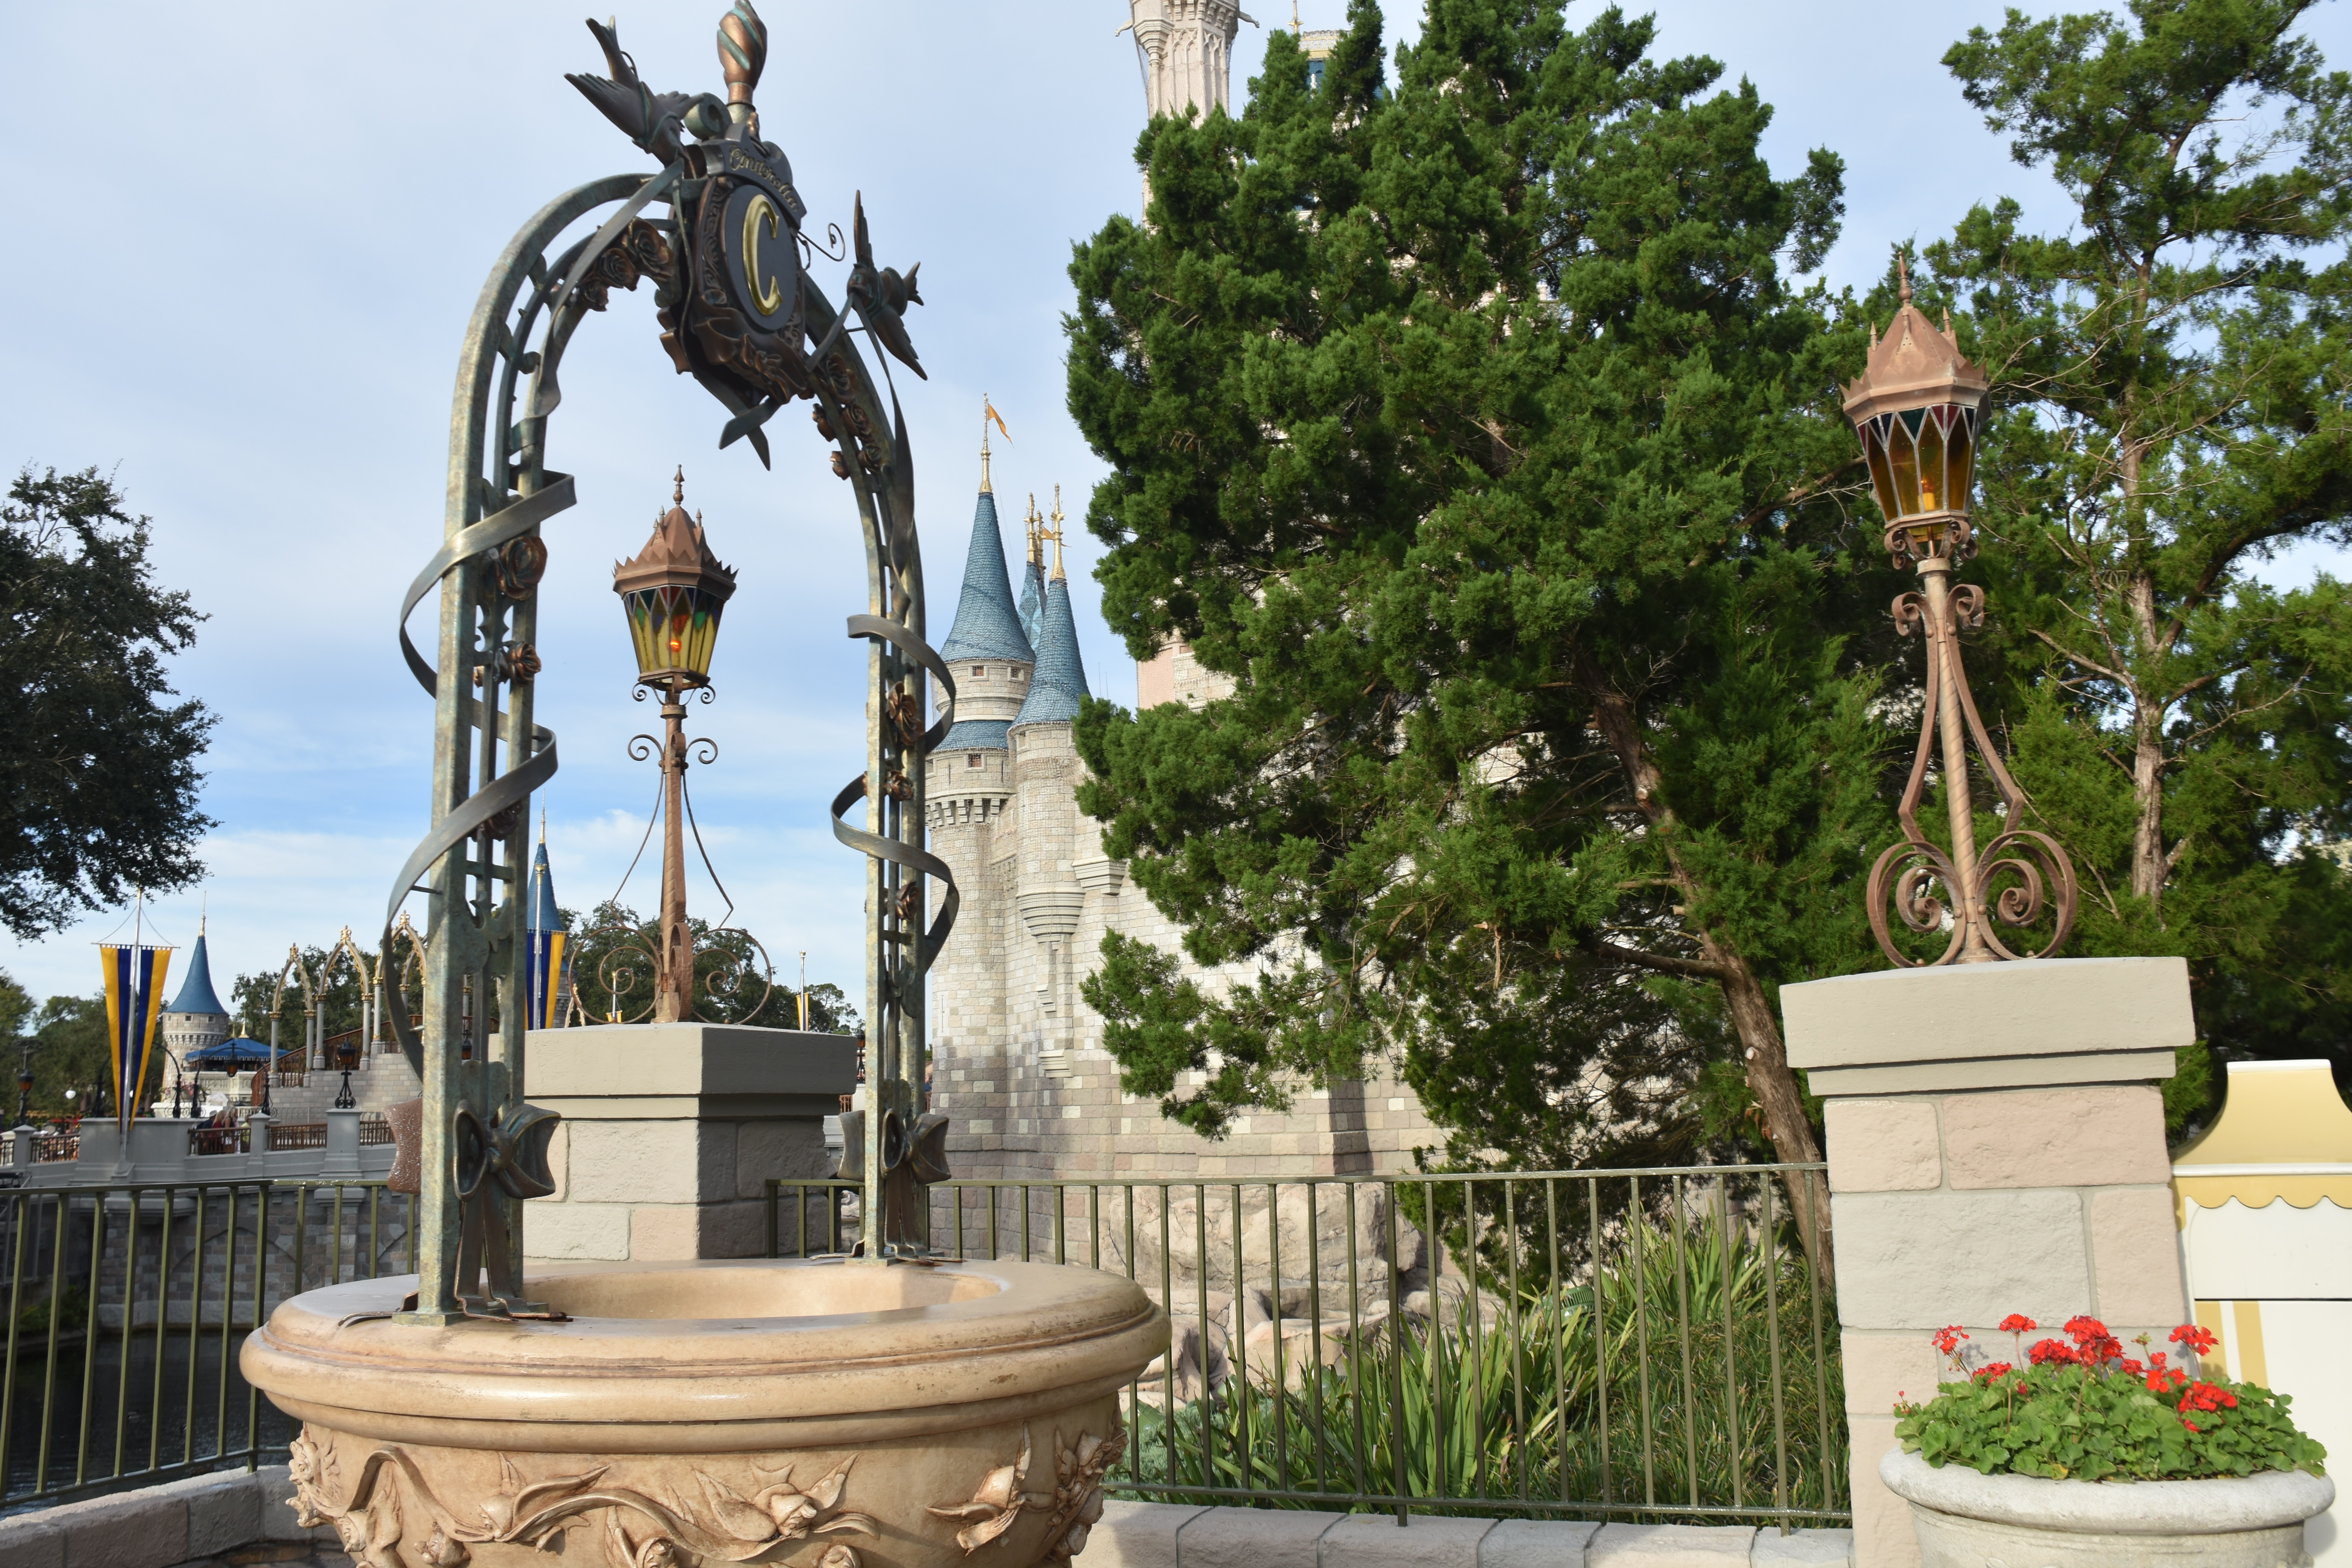 Disney donates coins from Wishing Wells to local charity